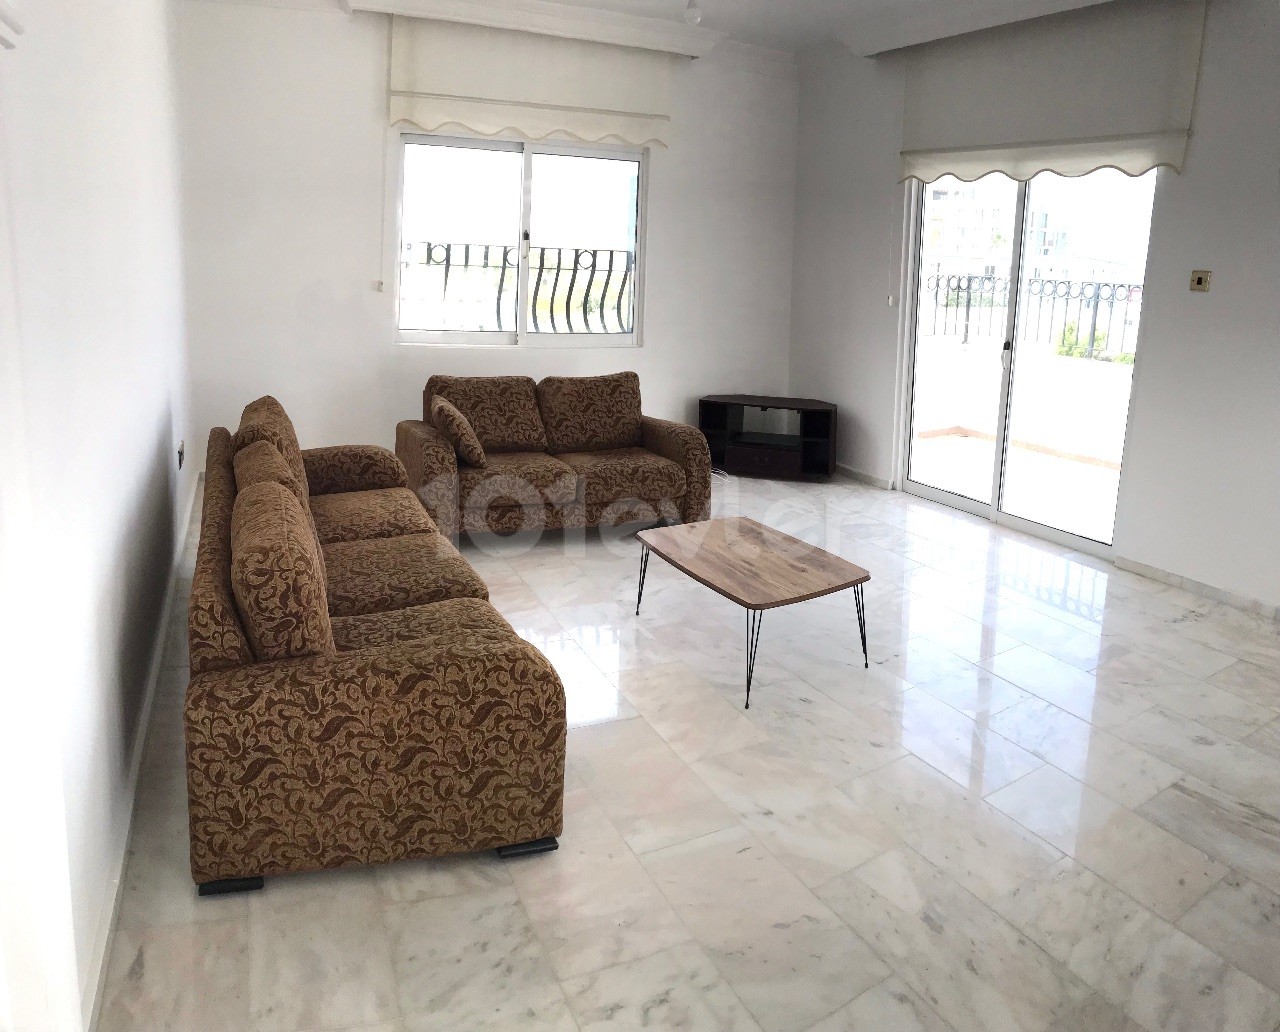 GIRNE CENTRAL , 185M2 PENTHOUSE , 50M2 TERRACE , SUPER LOCATION, CLEAN AND WELL MAINTAINED TEL: 05428671000 ** 